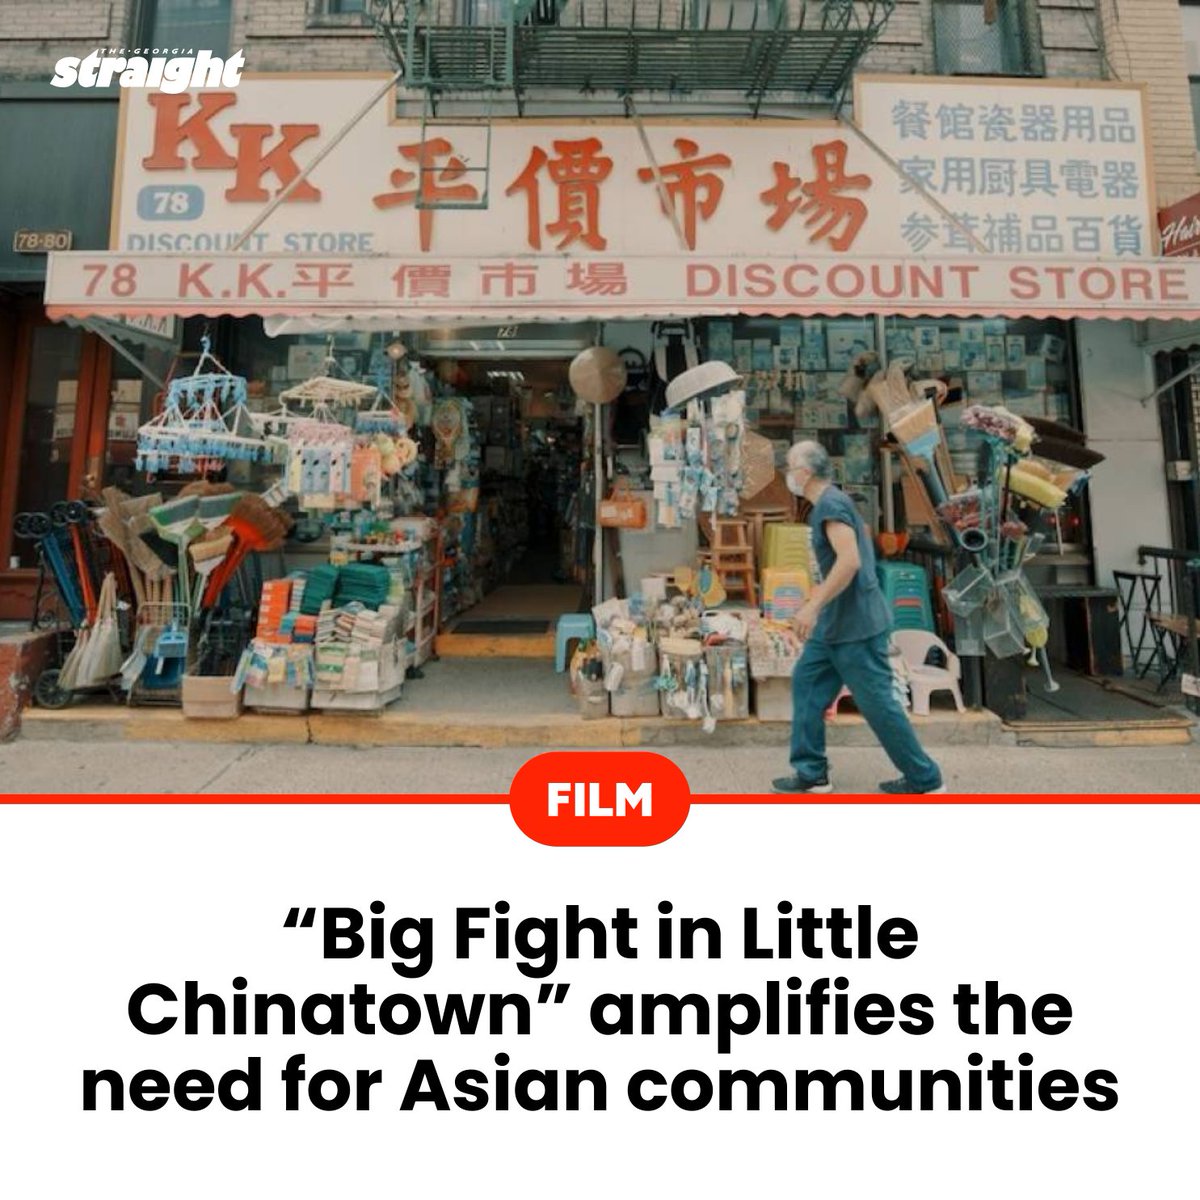 'Big Fight in Little Chinatown' highlights the importance of Chinatowns in North America against the backdrop of rapid urban expansion and gentrification. Learn more: straight.com/movies/big-fig…